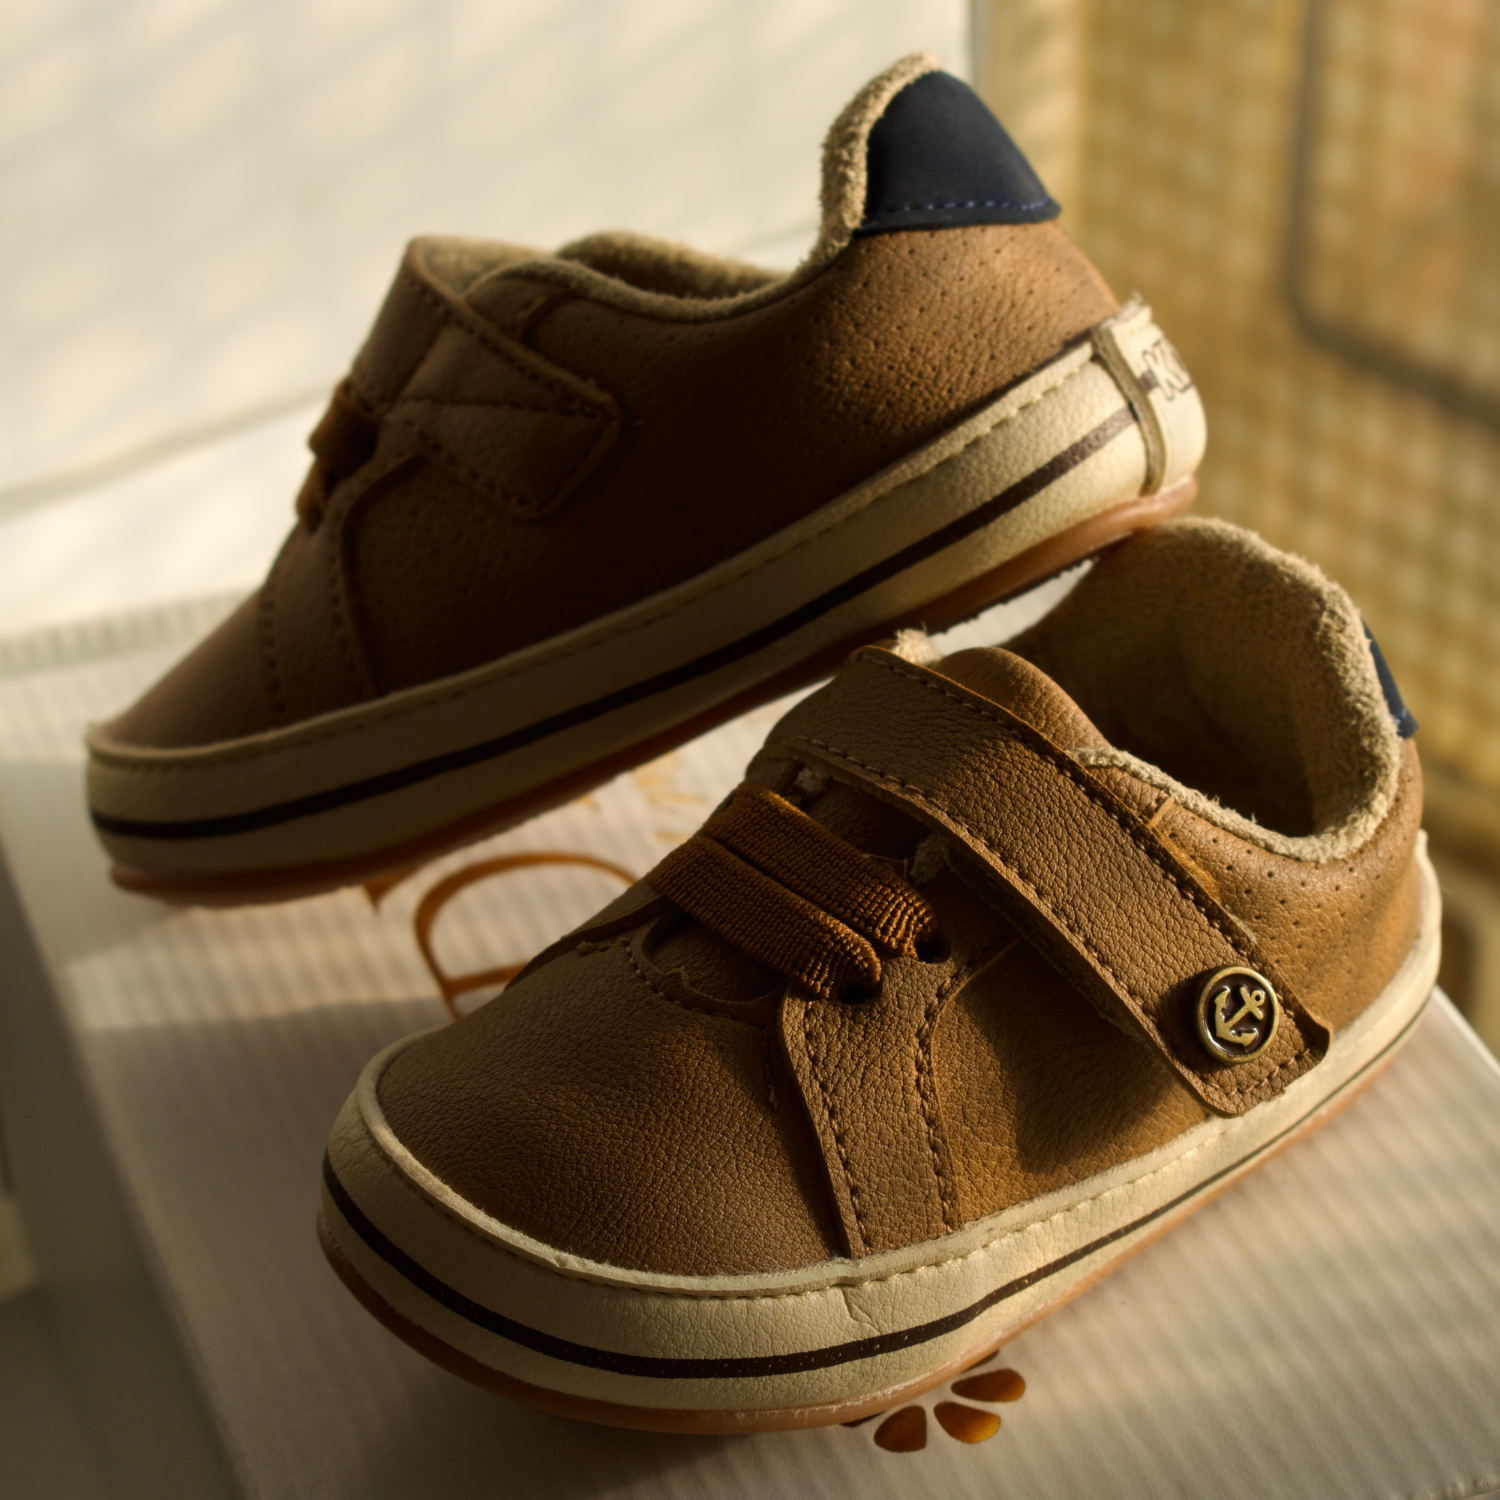 Baby Luca's Shoes